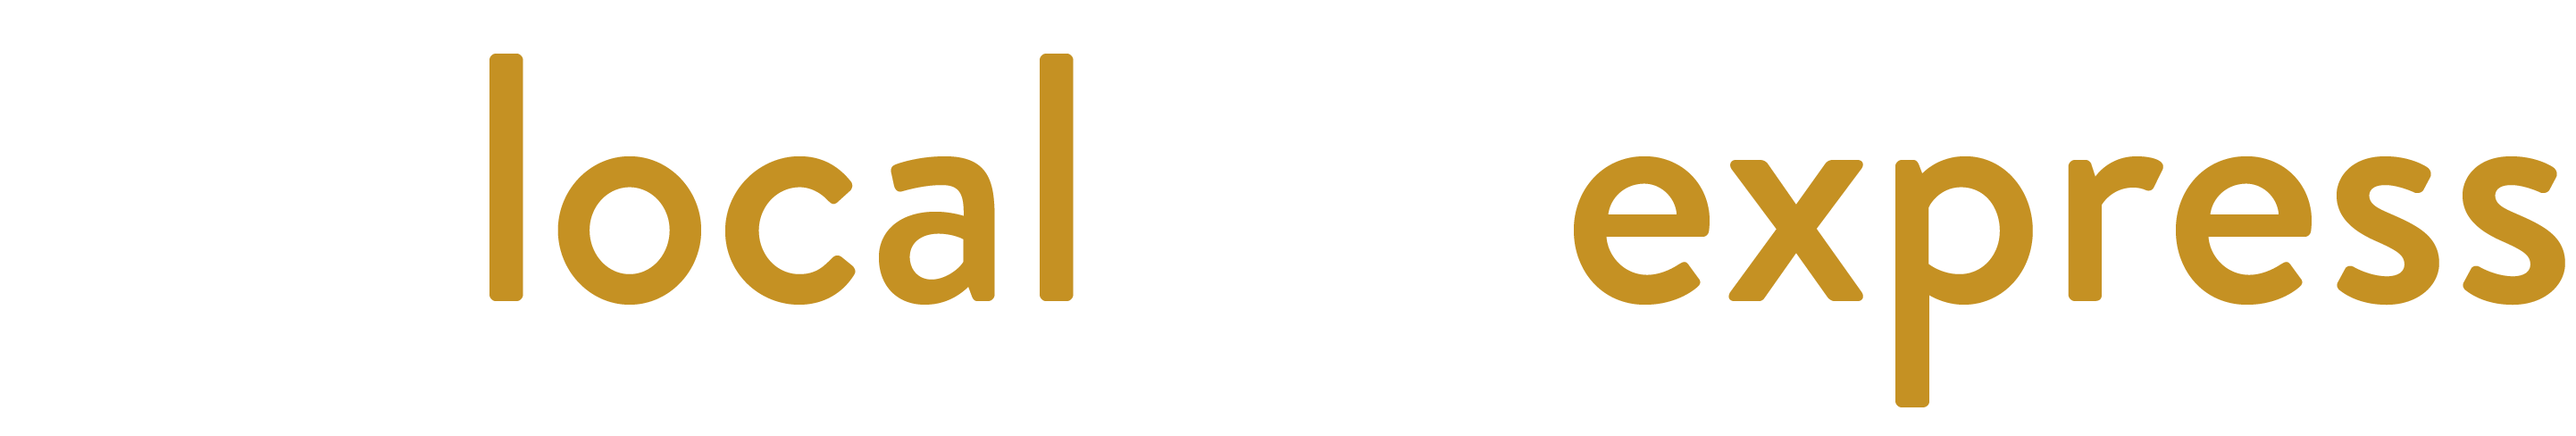 Live Local Live Express